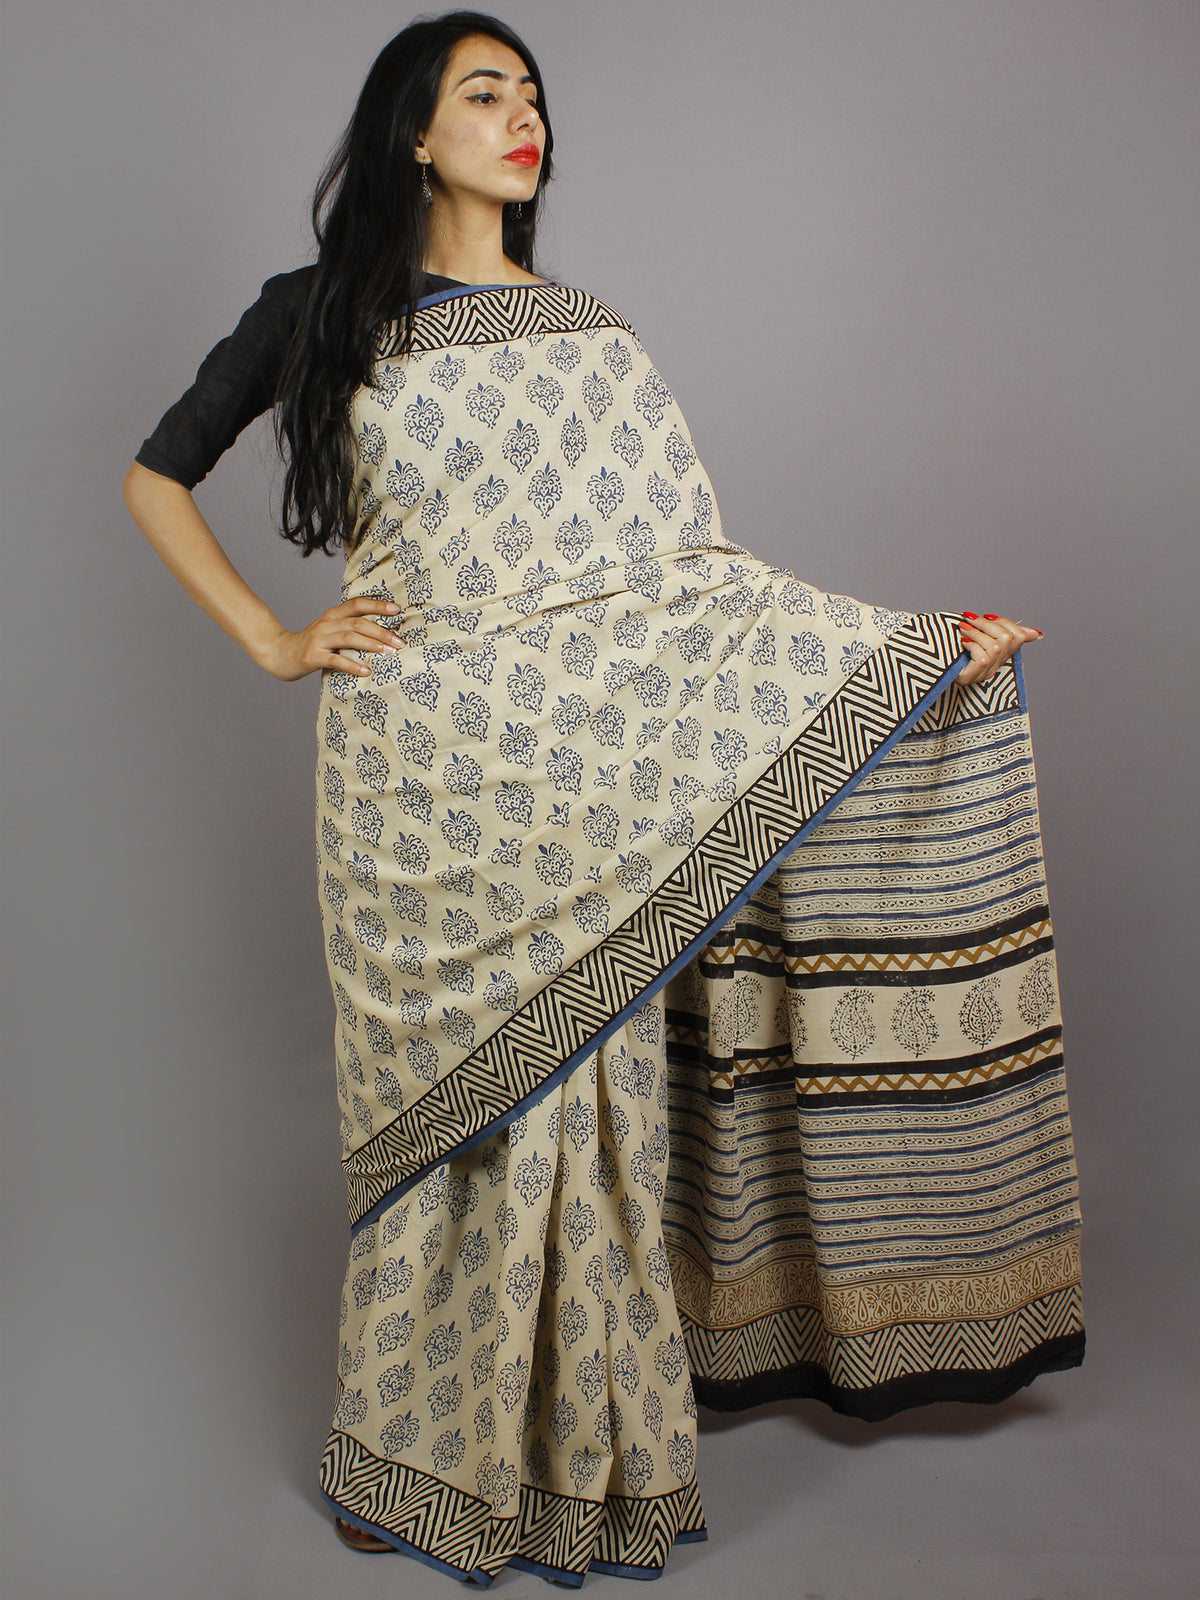 Beige Blue Black Hand Block Printed in Natural Colors Cotton Mul Saree - S031701234